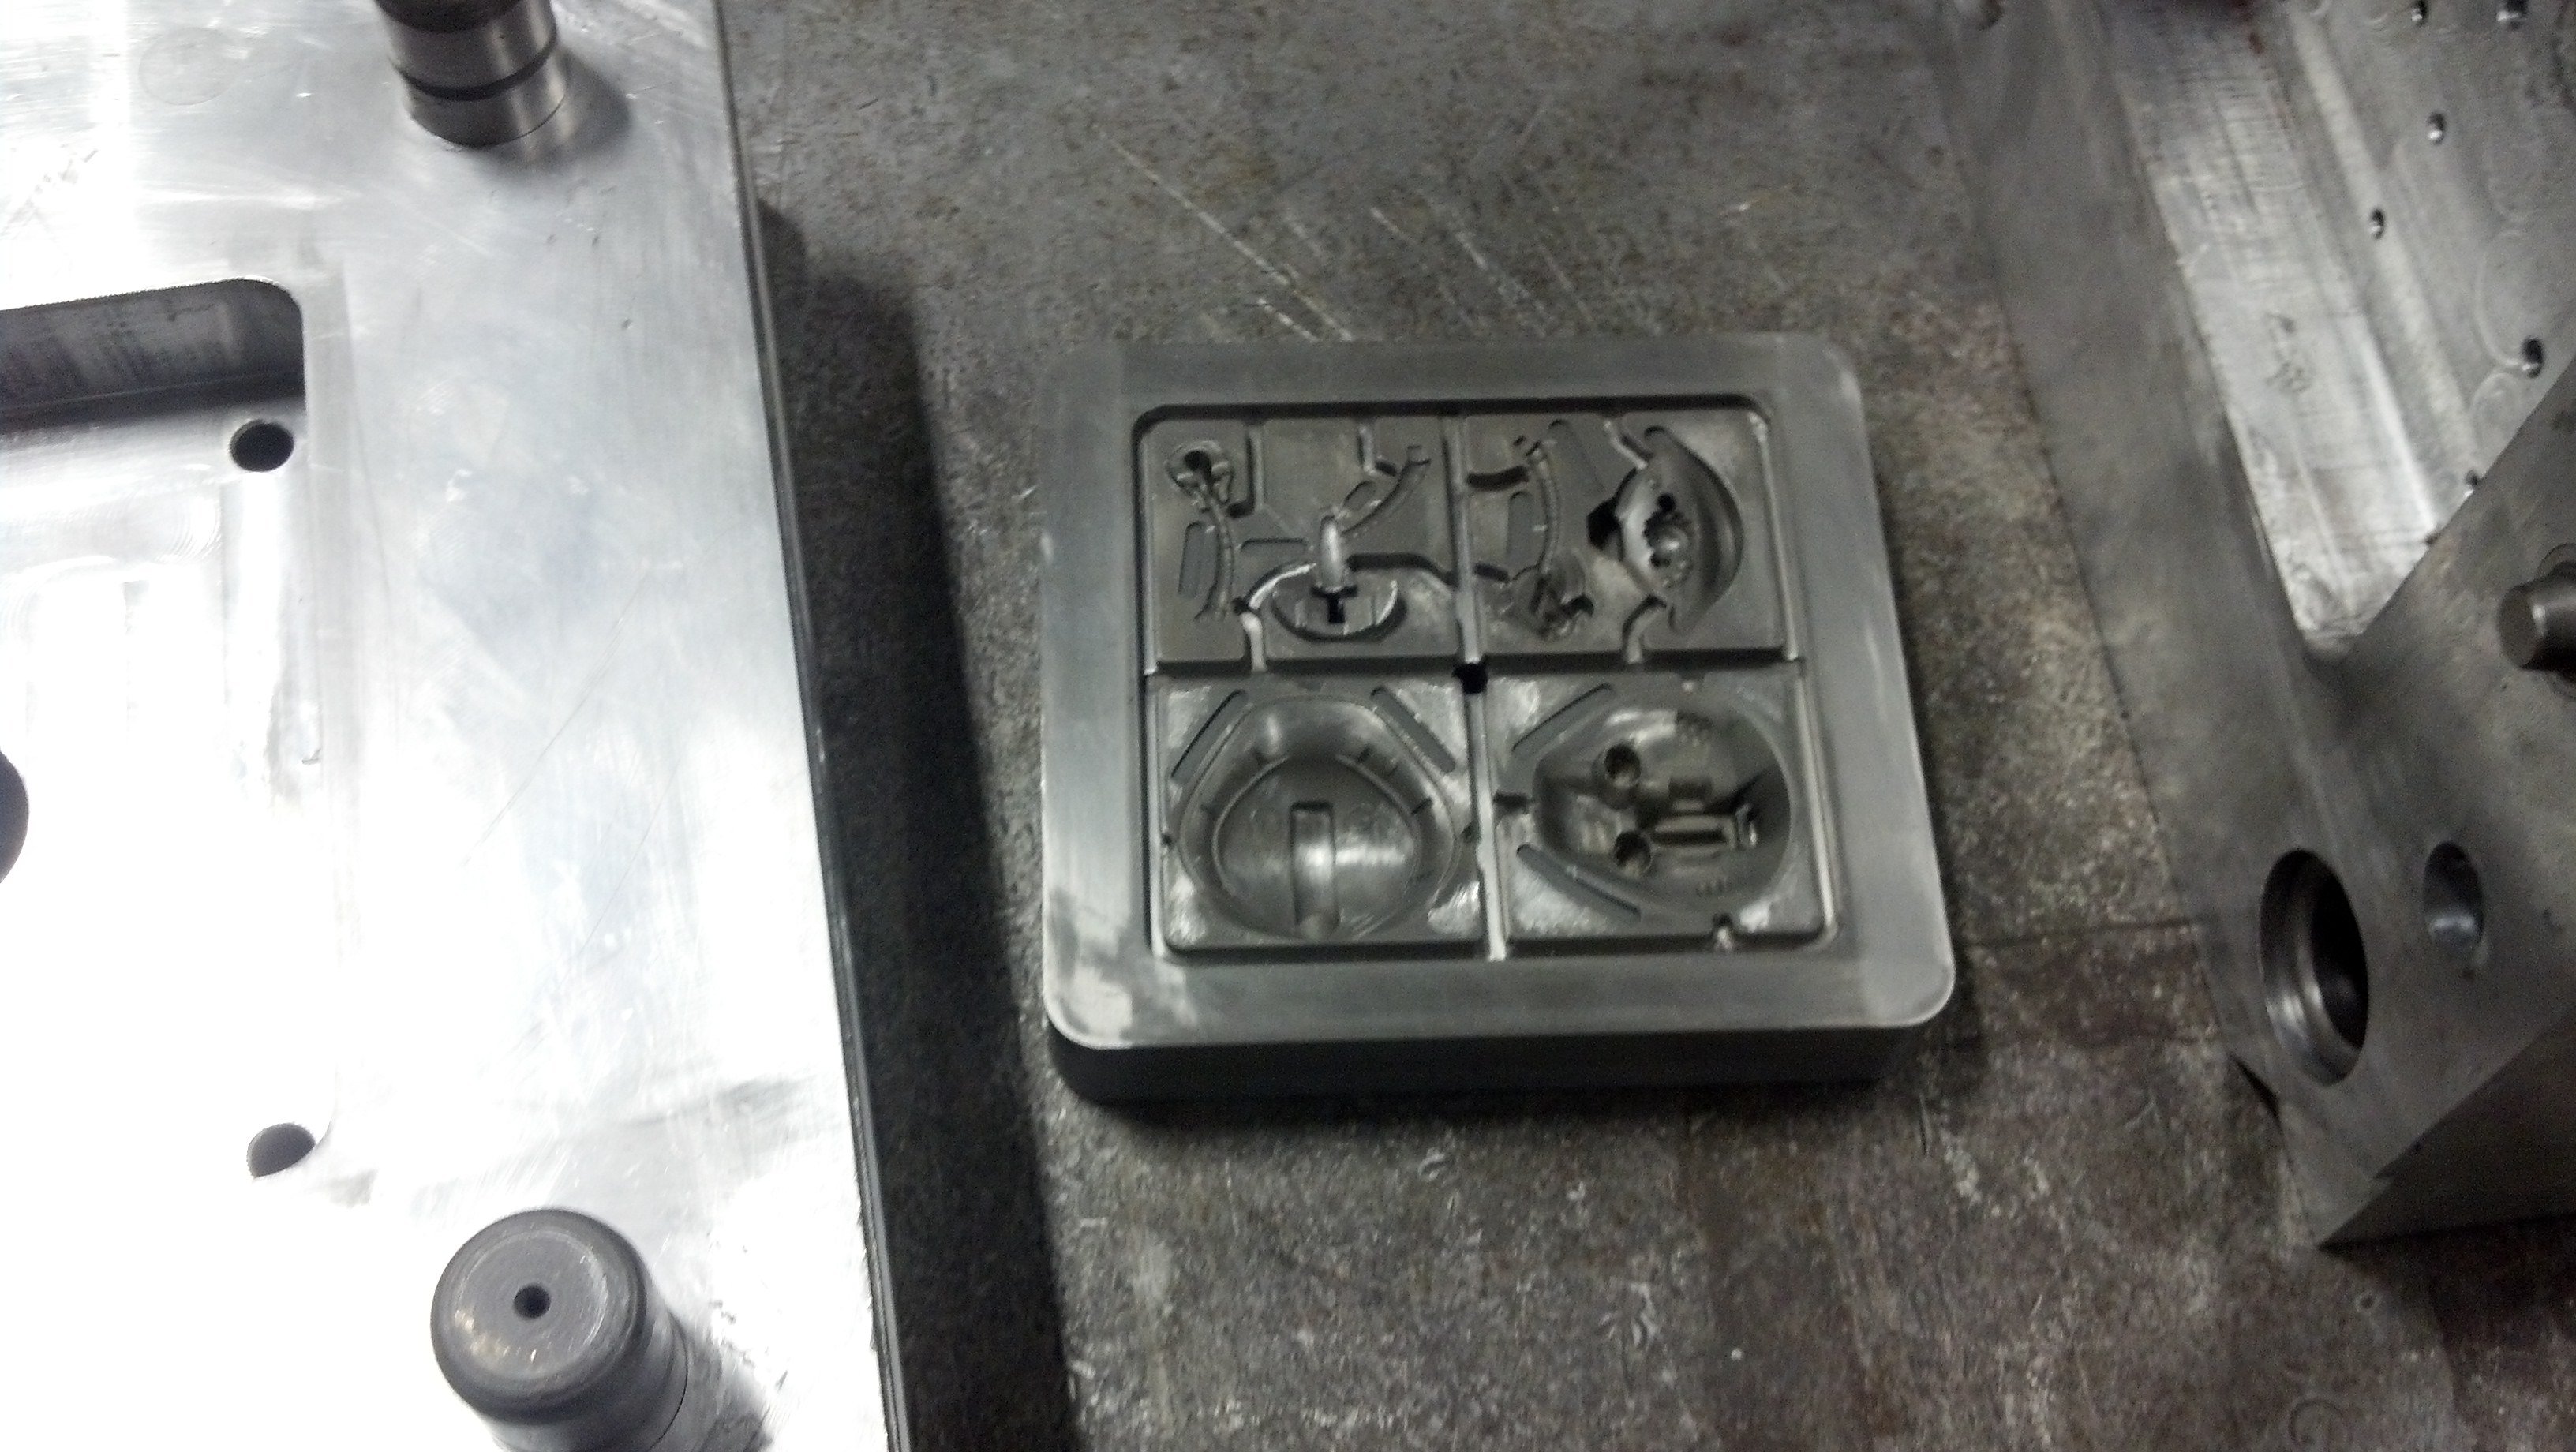 Injection mold tool for prototype tank toys